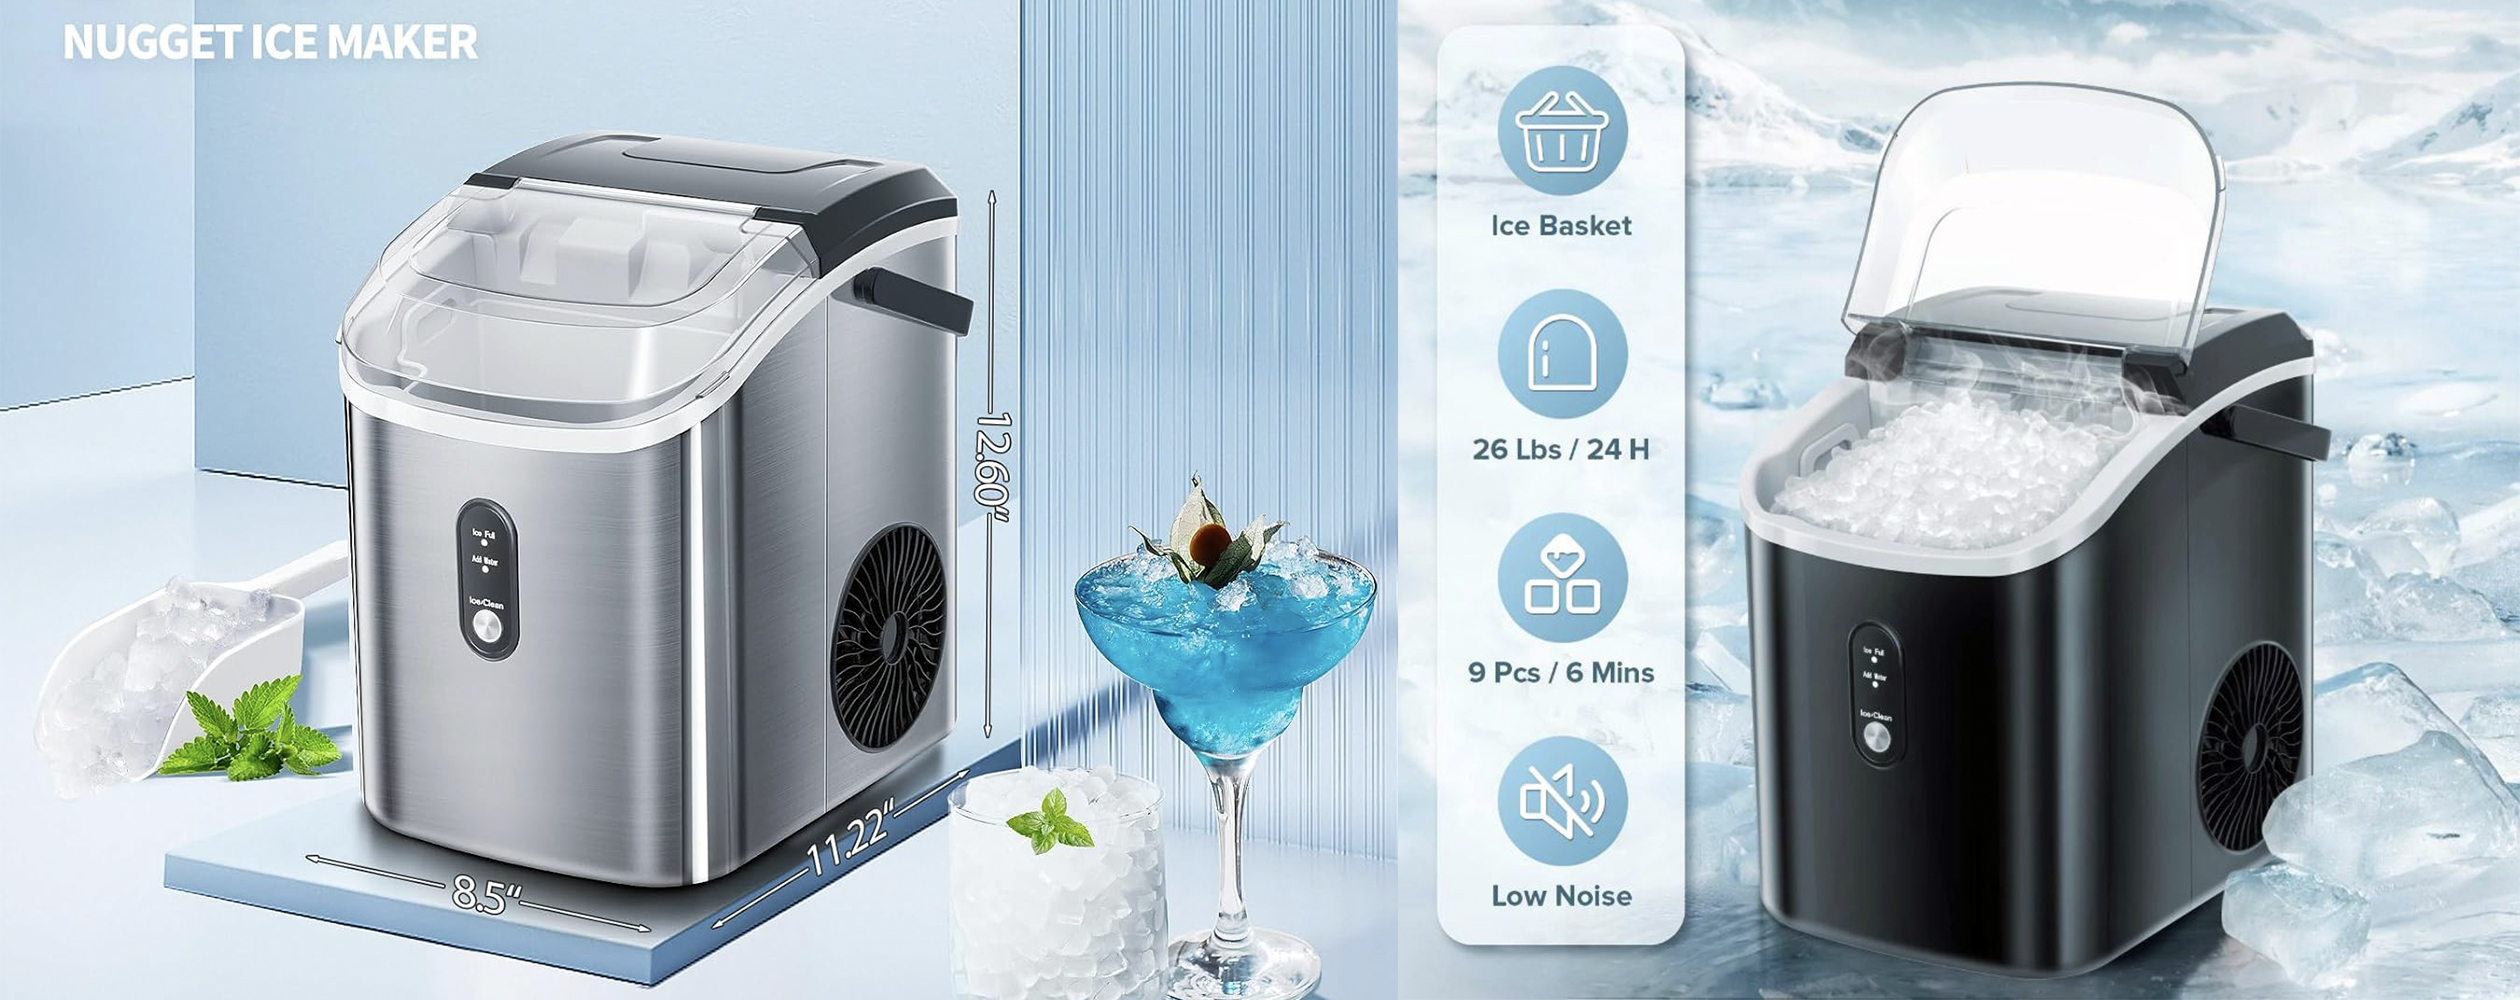 Antarctic Star Nugget Ice Maker - Holiday Gift Guide for Architects 2023